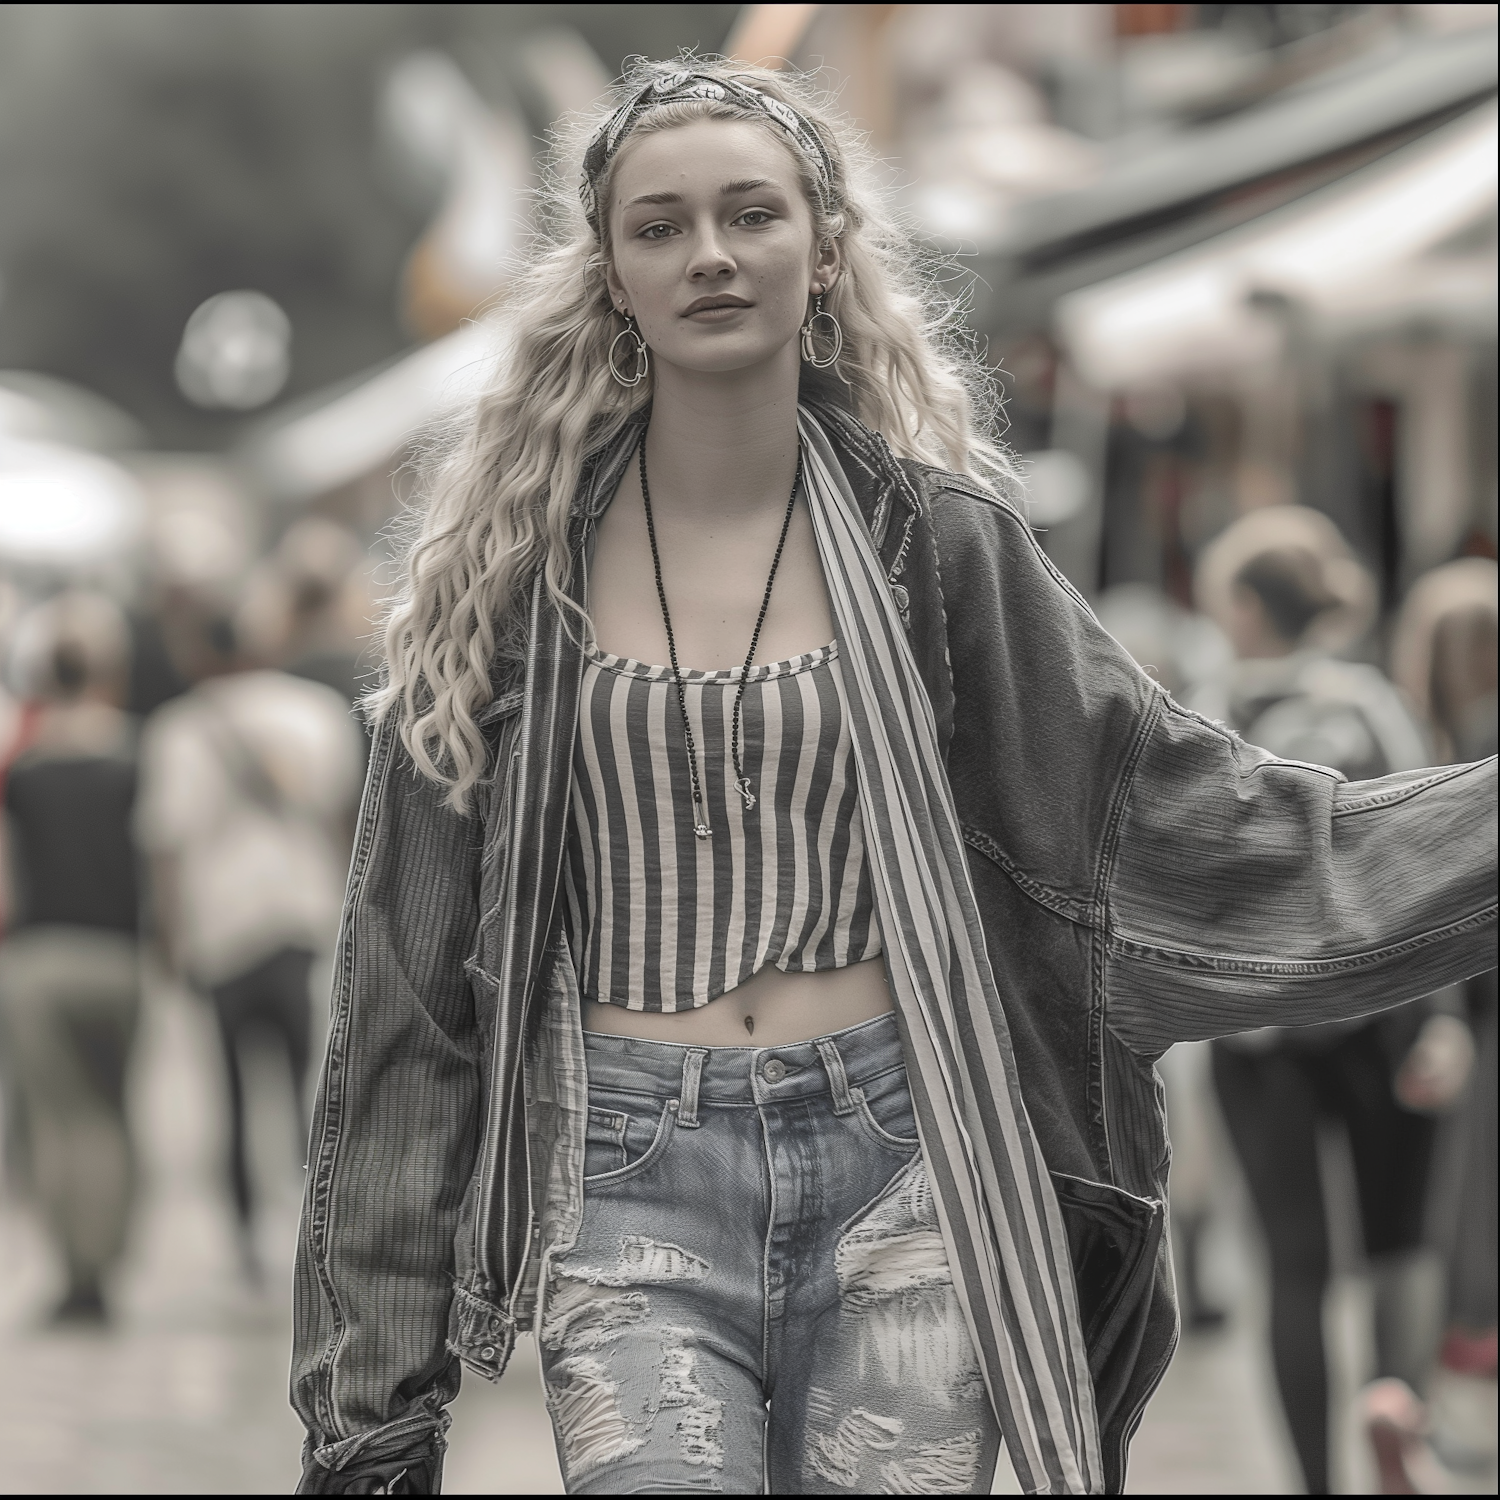 Confident Young Woman in Bustling Street